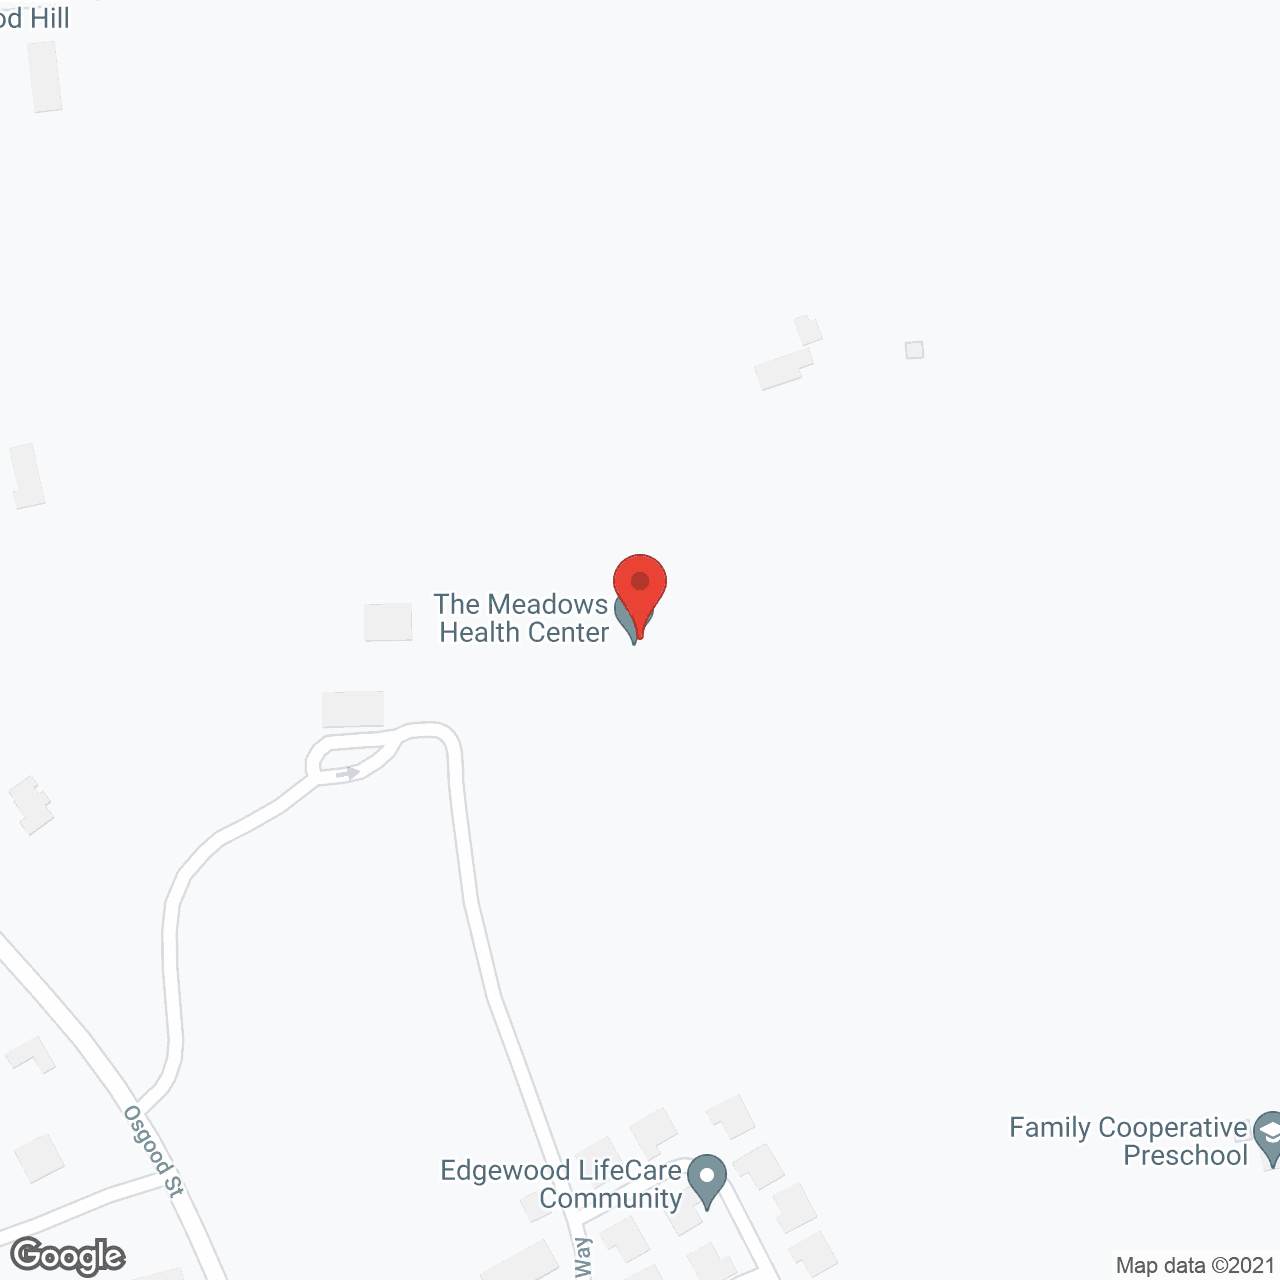 The Meadows Health Center at Edgewood in google map